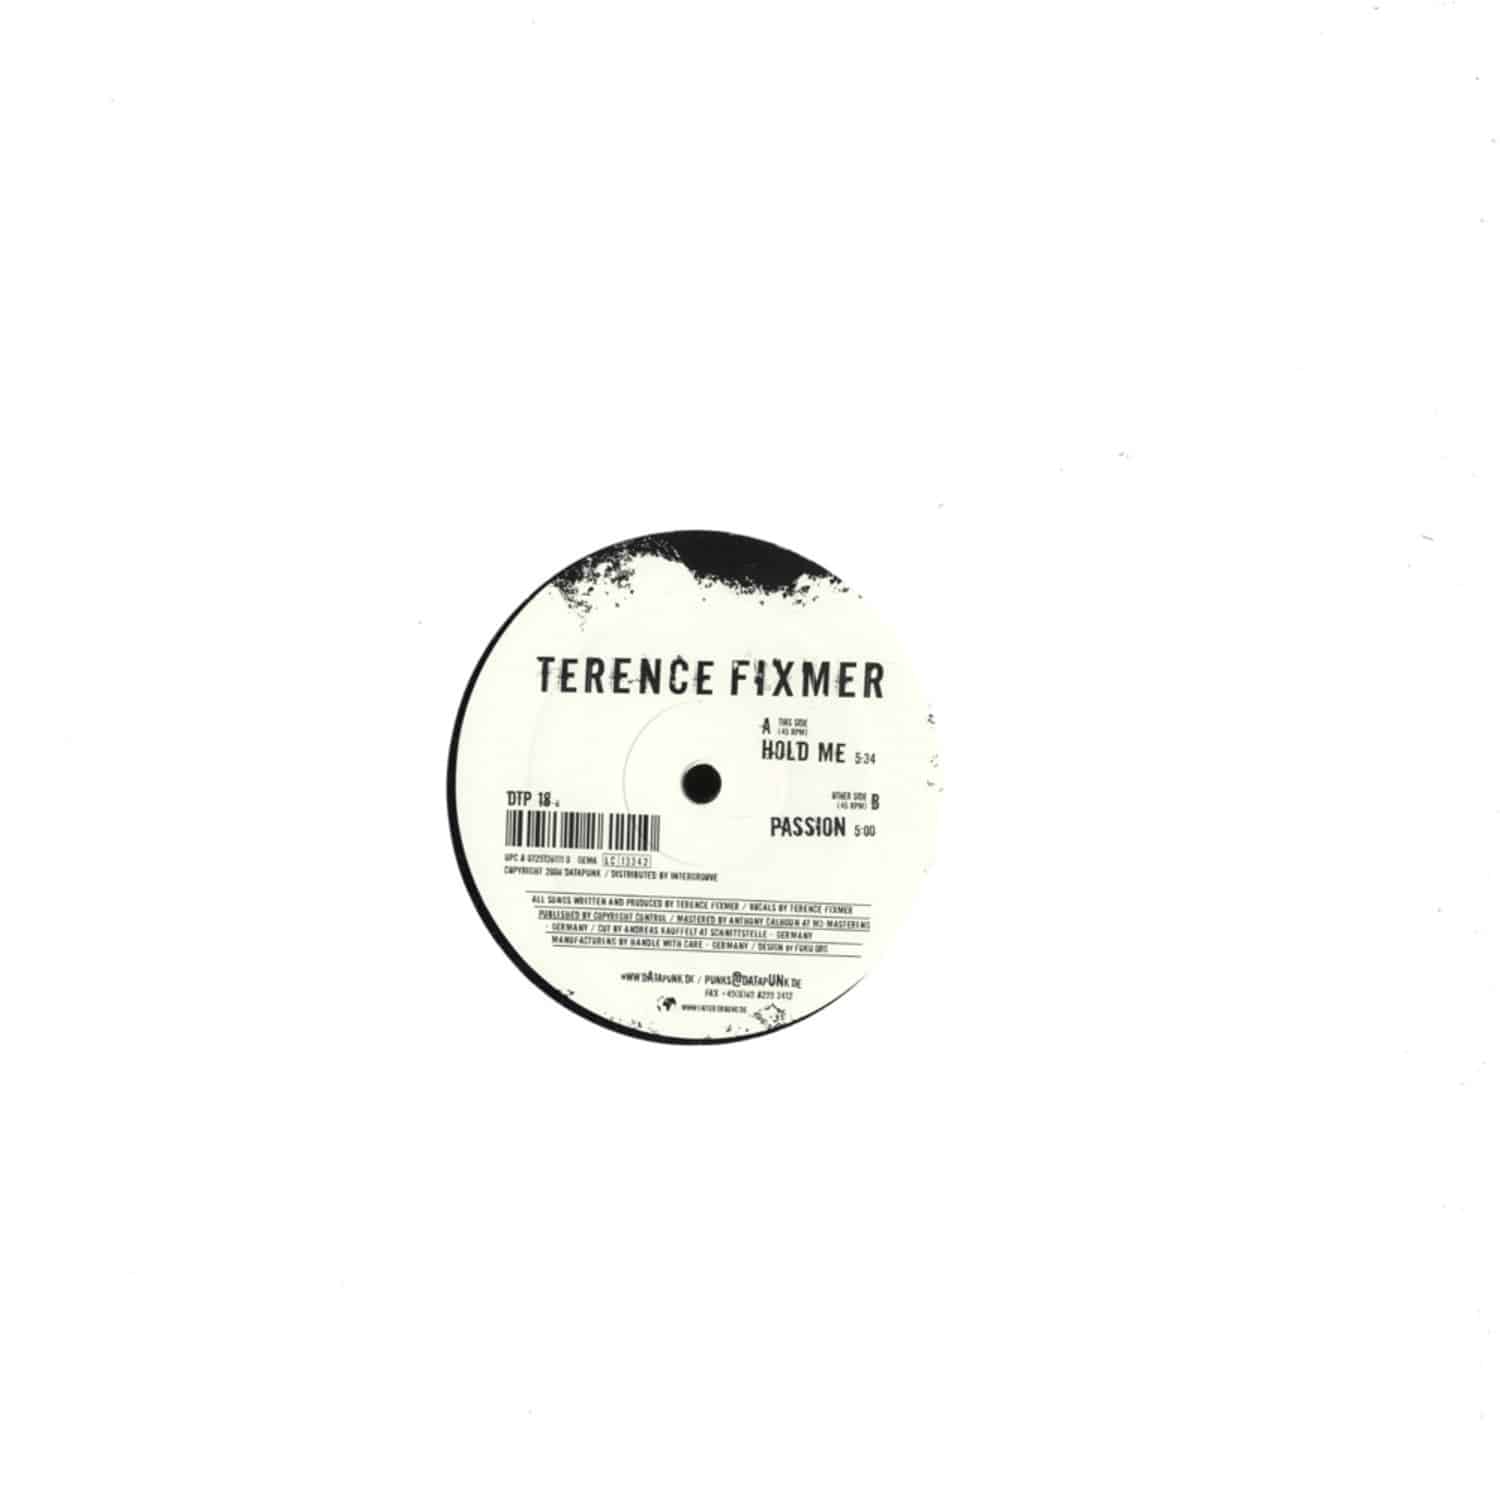 Terence Fixmer - PASSION